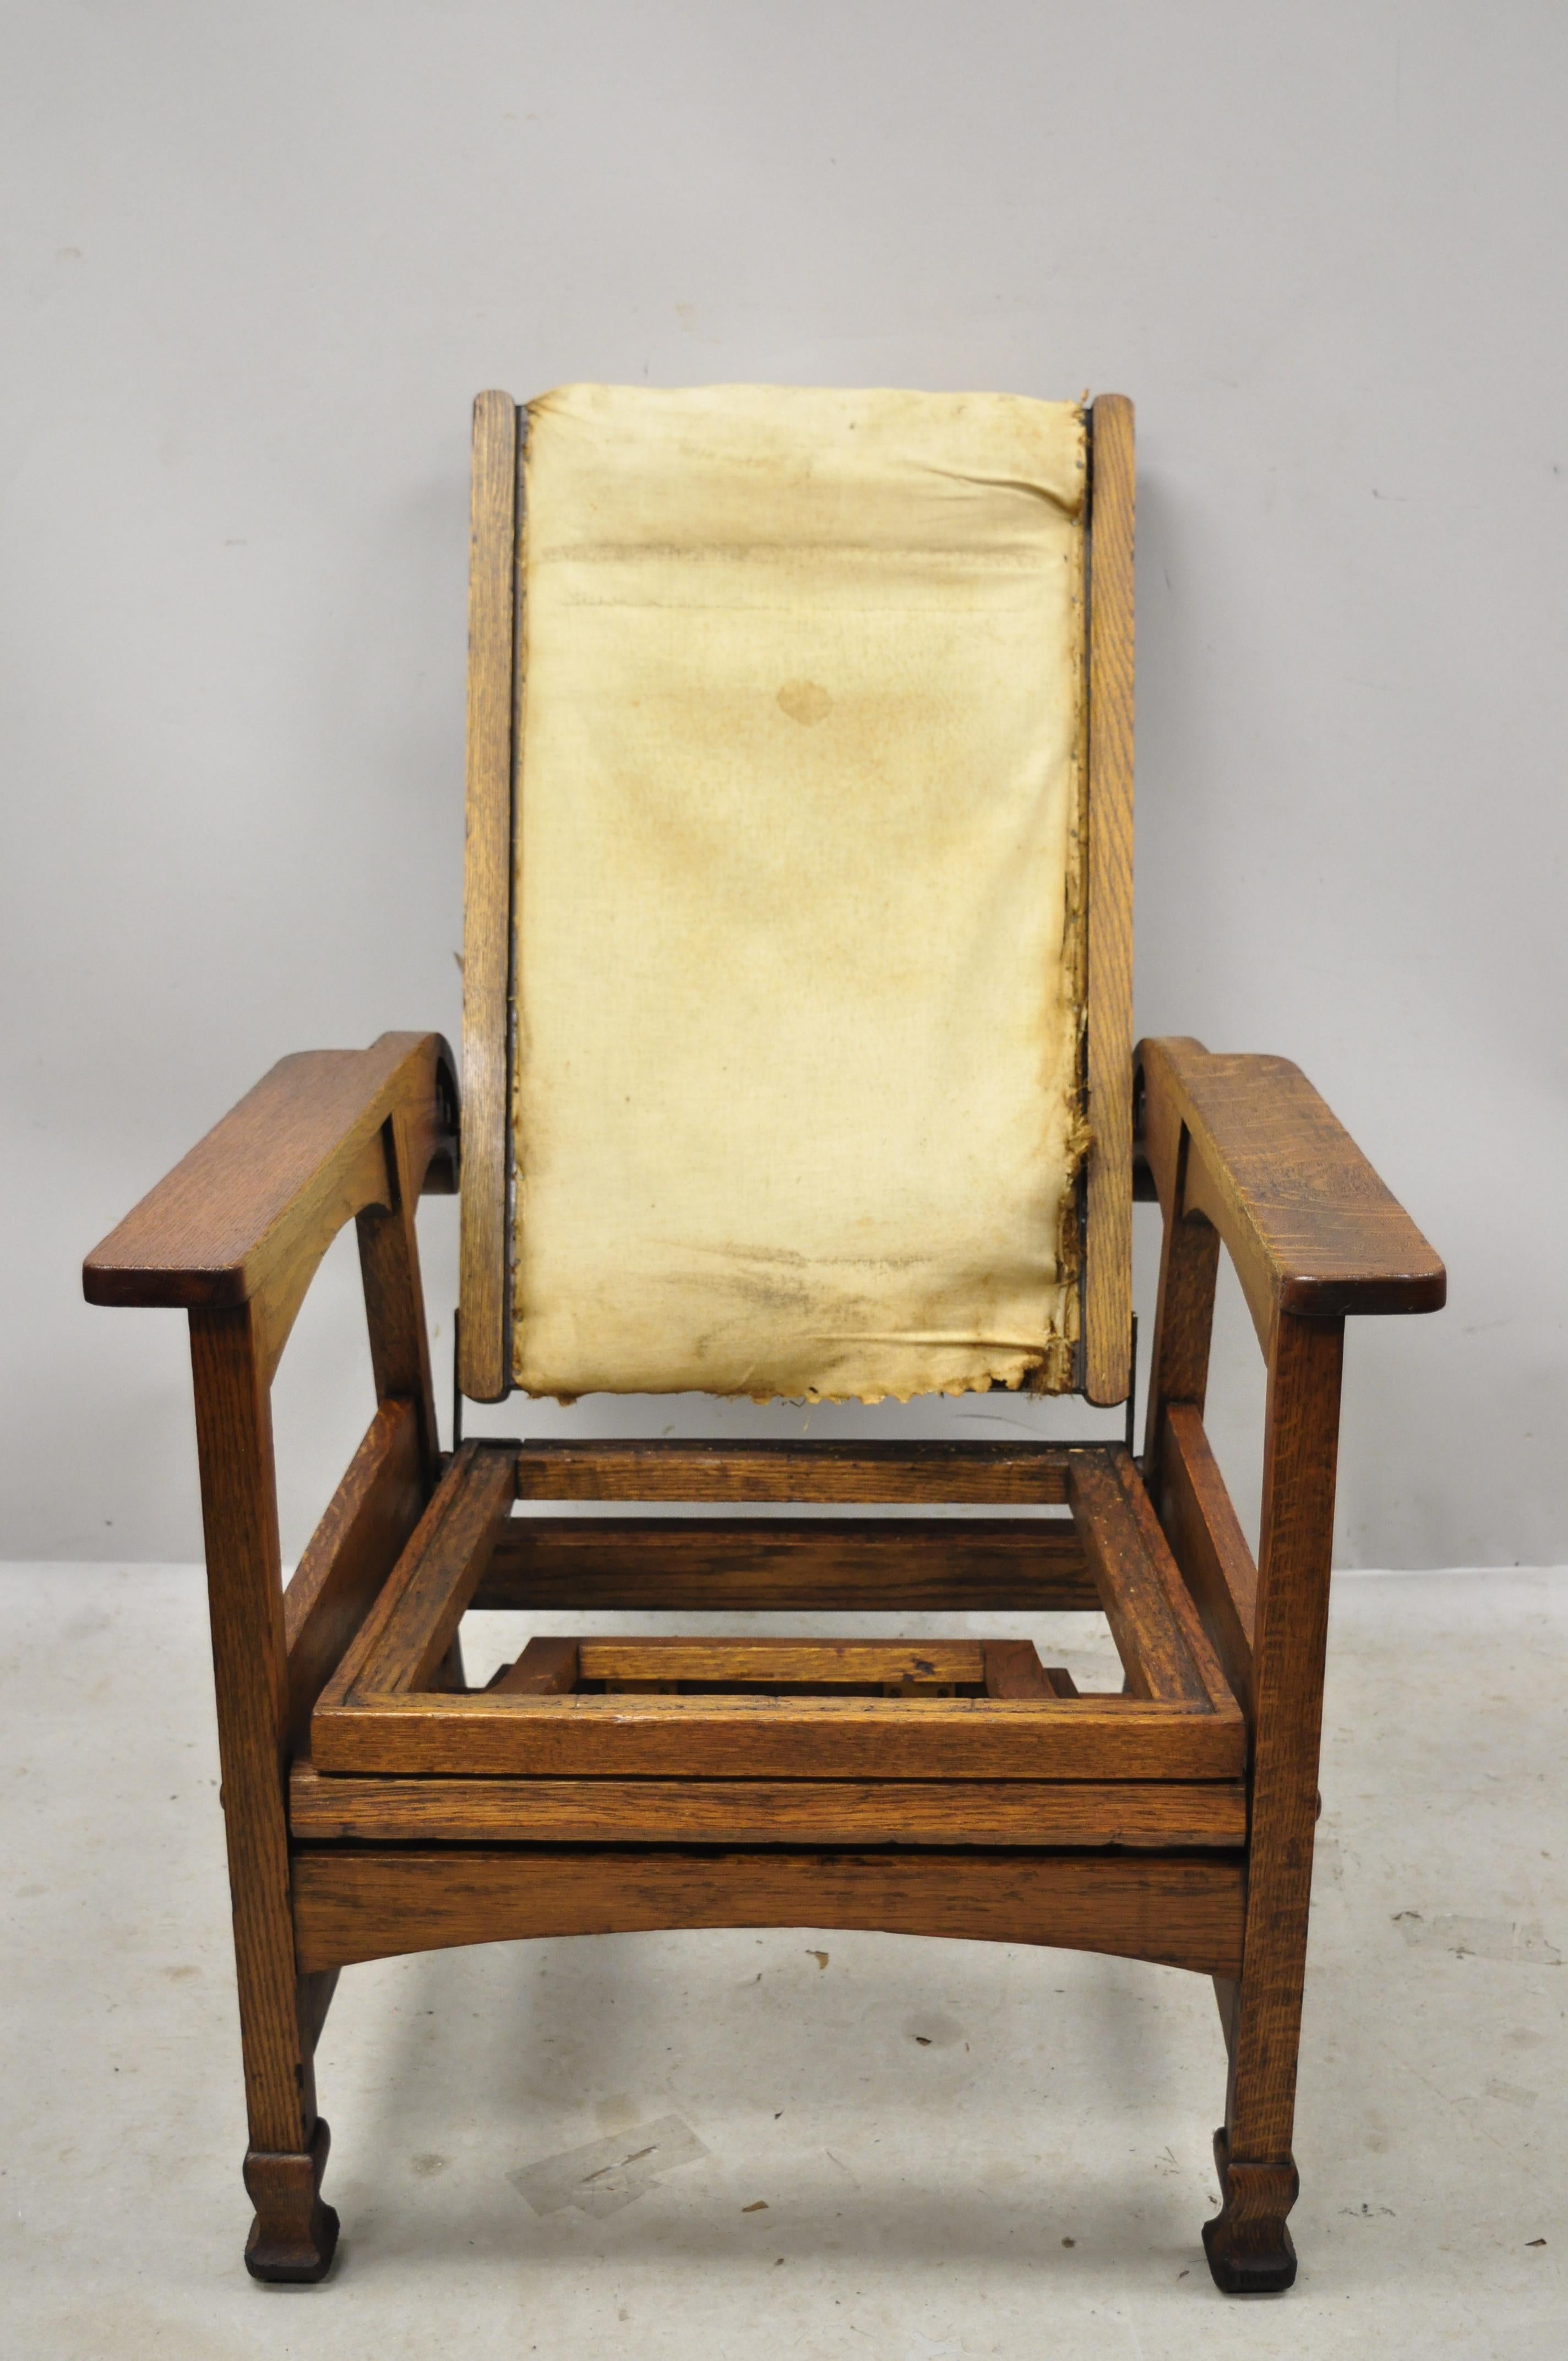 Antique Mission Oak Arts & Crafts reclining Morris chair with fold flip footrest ottoman attributed to Hunzinger. Item features fold out ottoman footrest, adjustable reeling back, solid wood construction, beautiful wood grain, unmarked, very nice